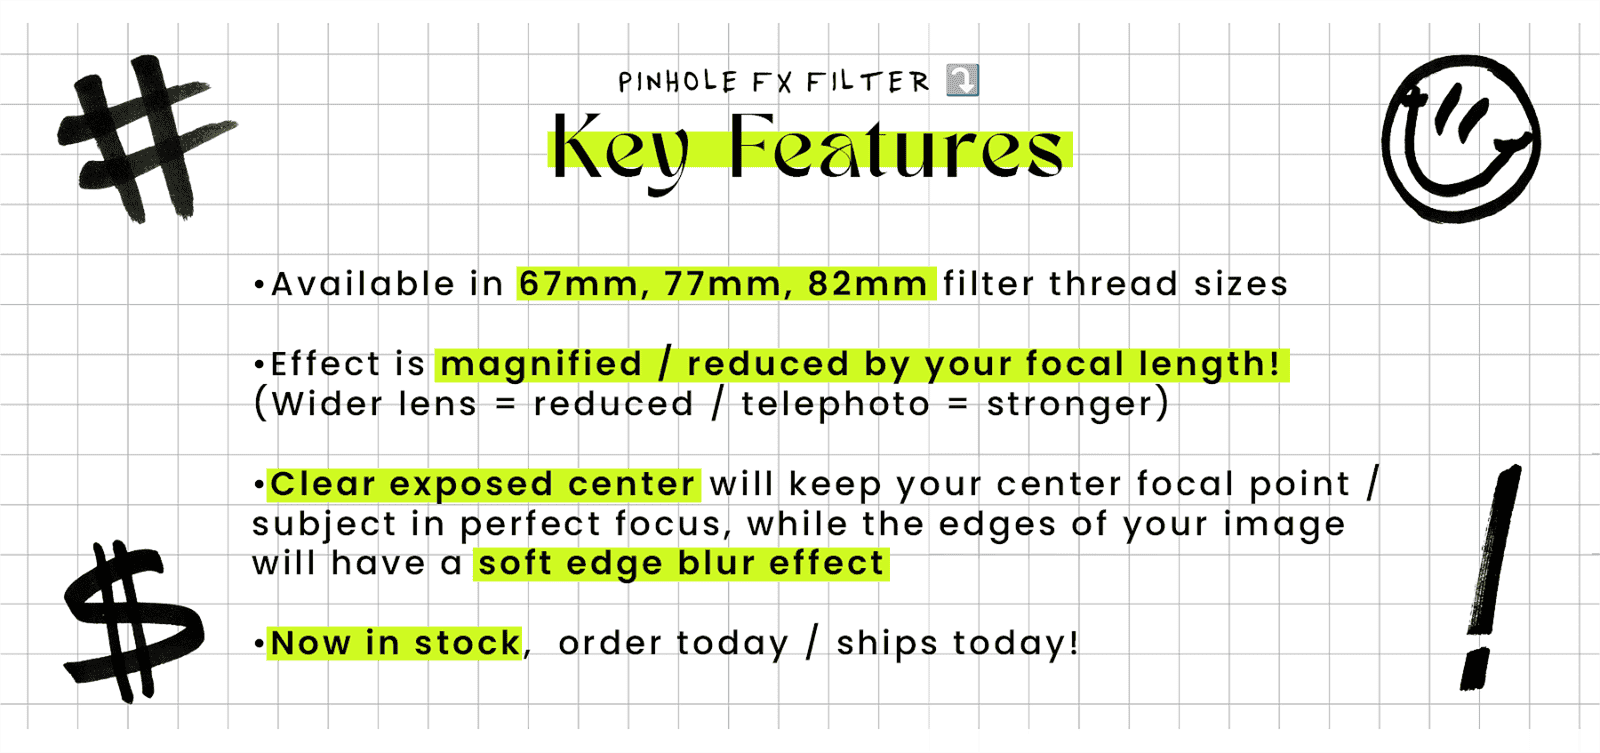 Here are some key features of the Pinhole FX Filter